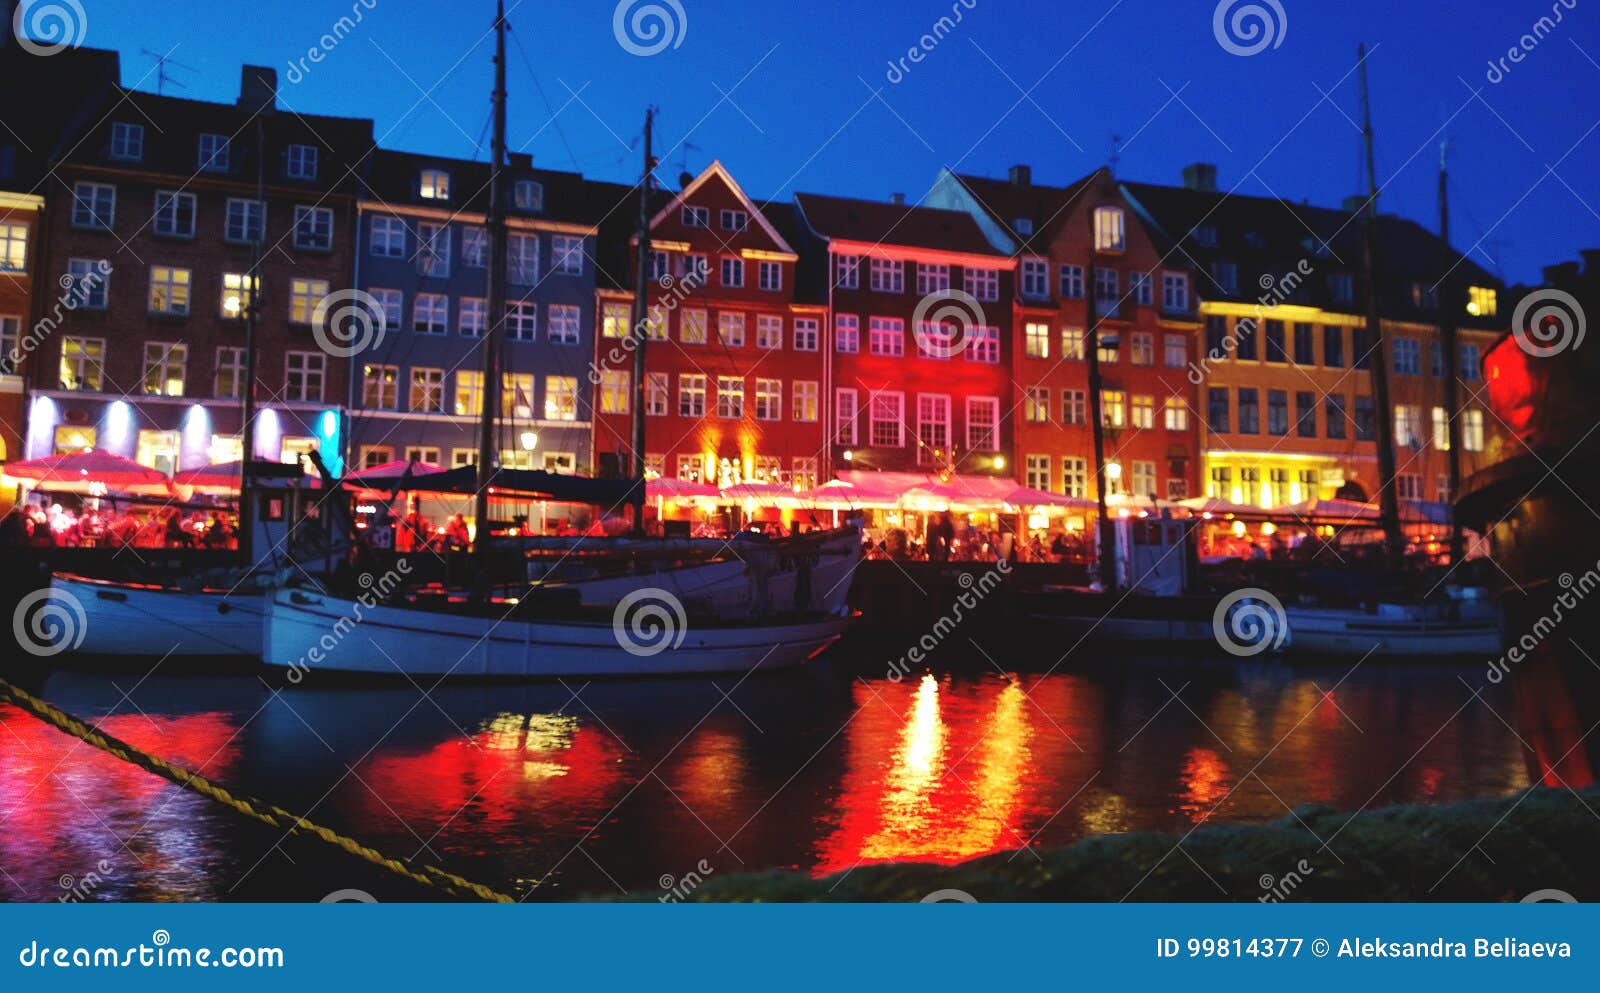 Bedøvelsesmiddel dilemma sandwich Romantic Beautiful Evening View of the Waterfront Nyhavn in Copenhagen. the  Reflection of a Bright Light Houses and Restaurants Stock Image - Image of  nyhavn, restaurants: 99814377